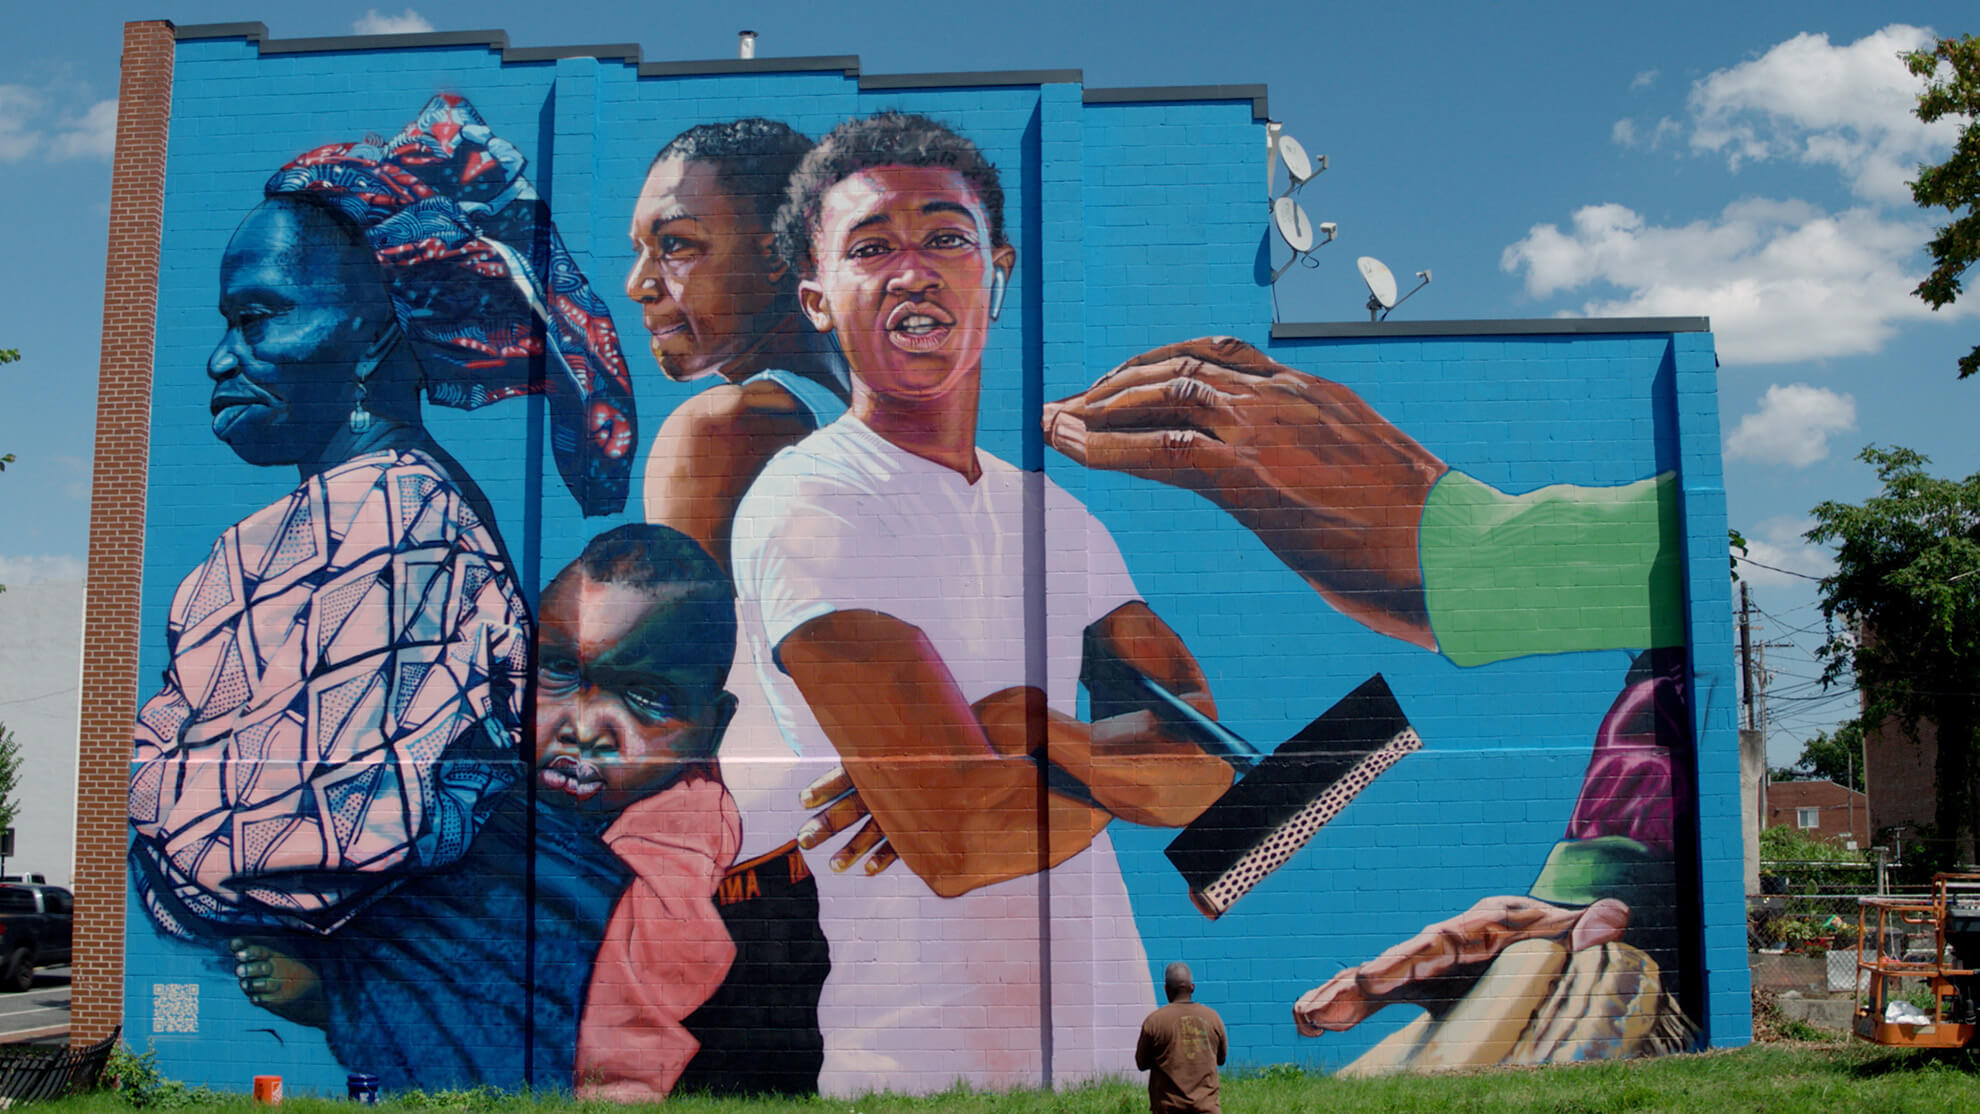 A full image showcasing the mural "African in America." On the left, a Black woman faces left in traditional clothes carries a baby on her back. In the center foreground is a young Black man in a white shirt looking at the viewer, and a Black woman behind him wearing a tank top. To the right is a hand emerging from a green sleeve playing a drum.